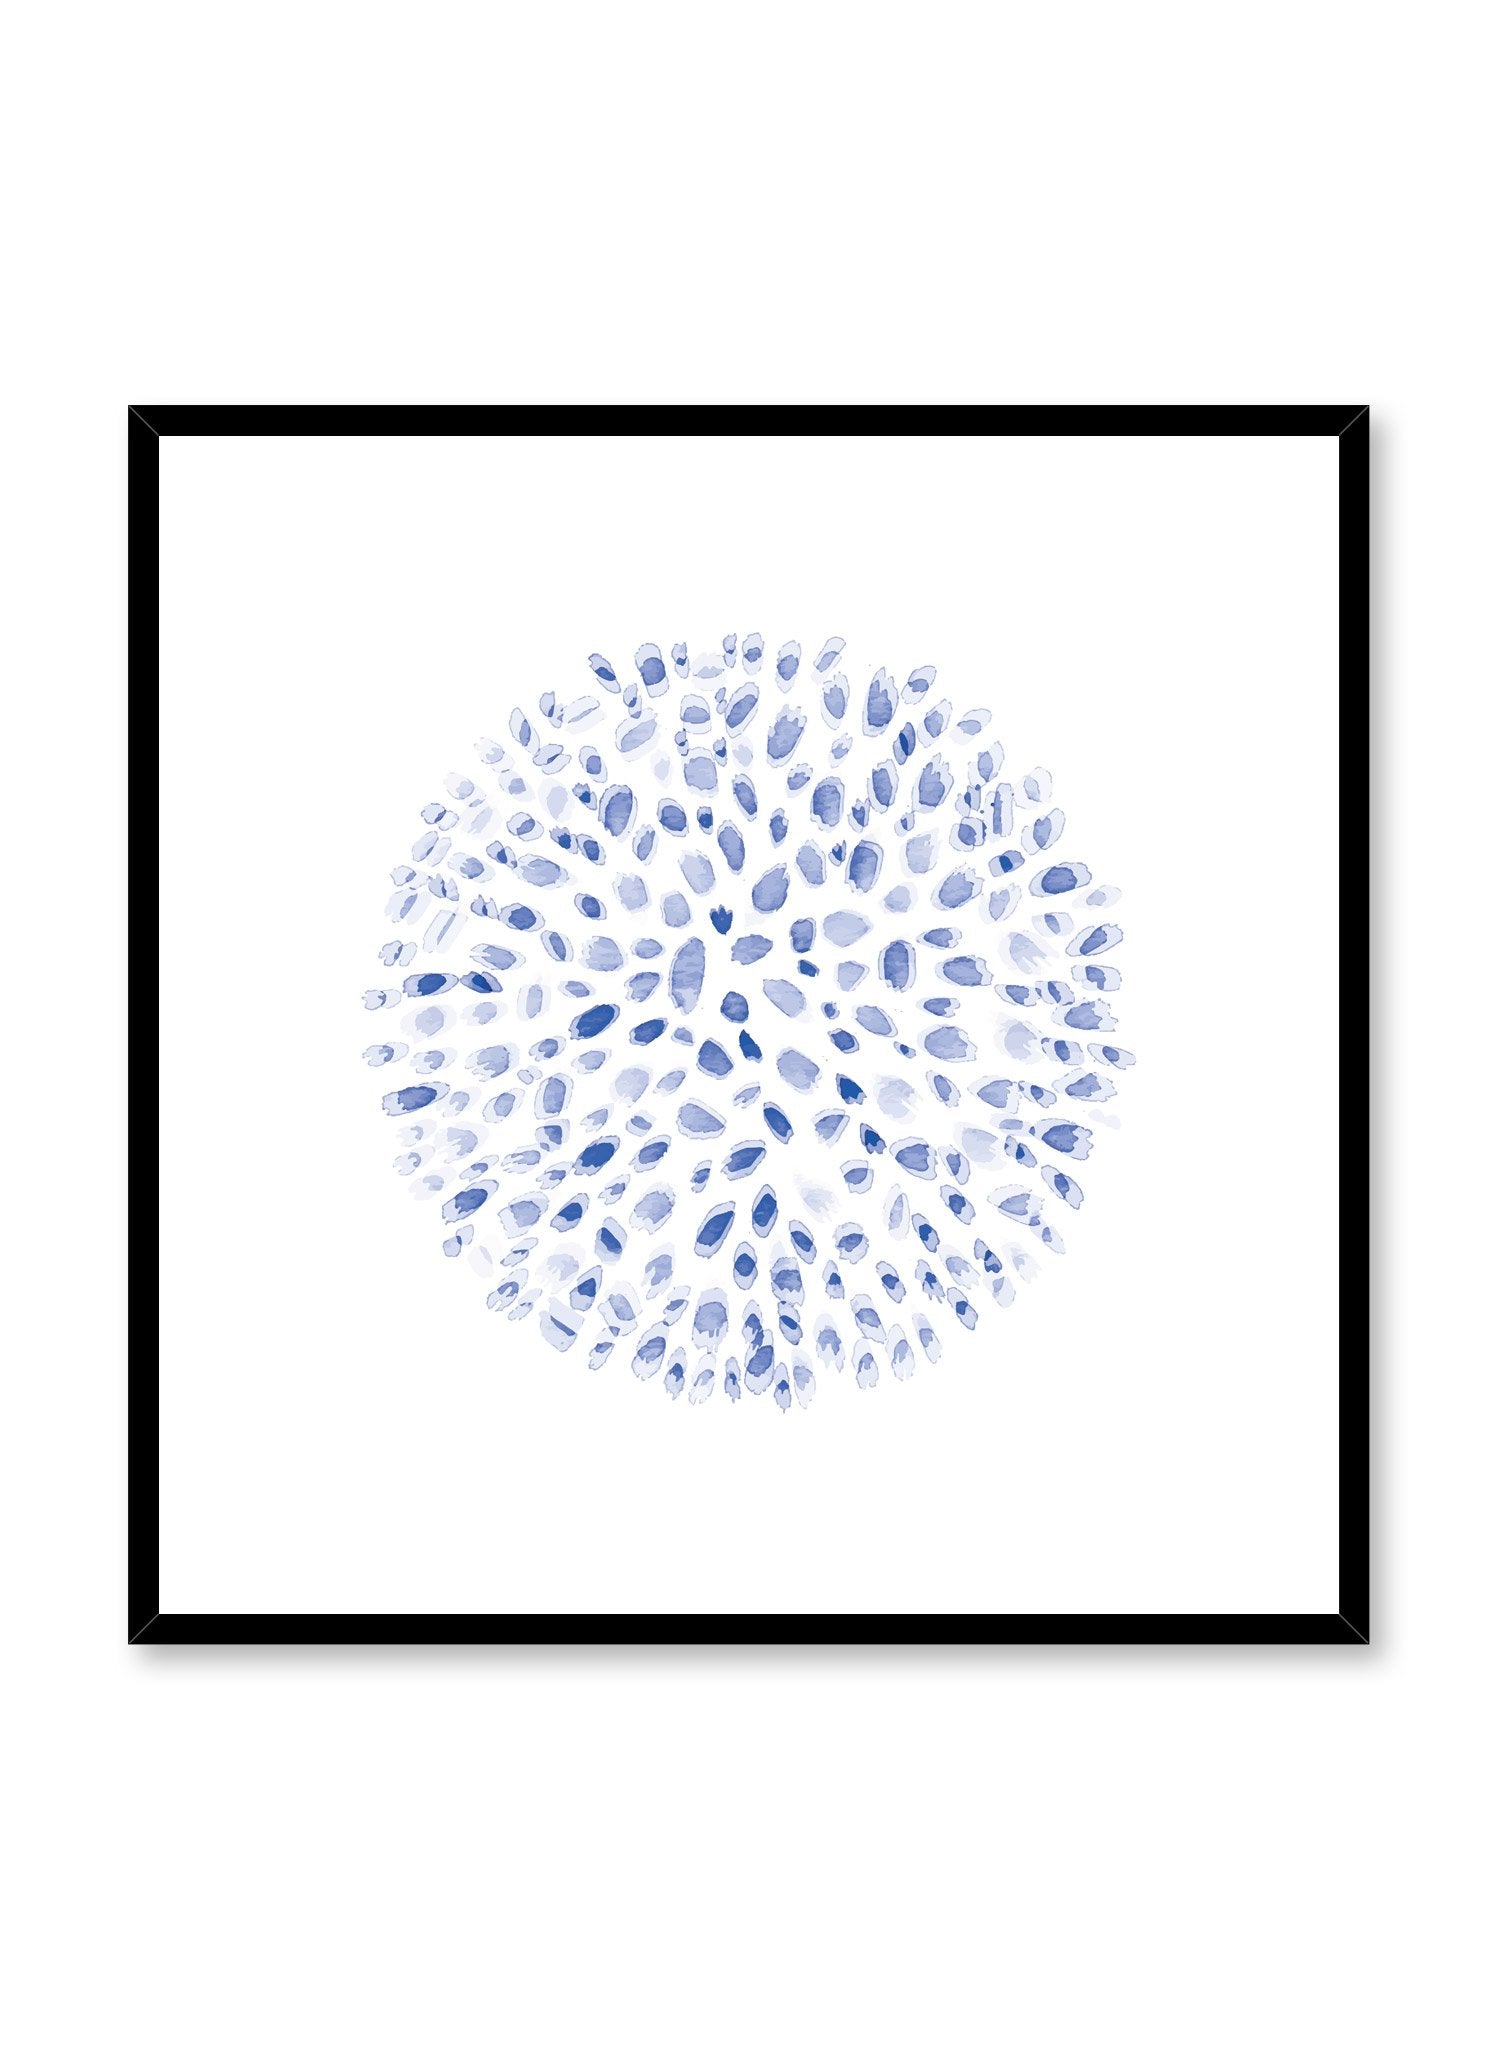 Modern minimalist poster by Opposite Wall with abstract illustration of Blue Dreams in square format